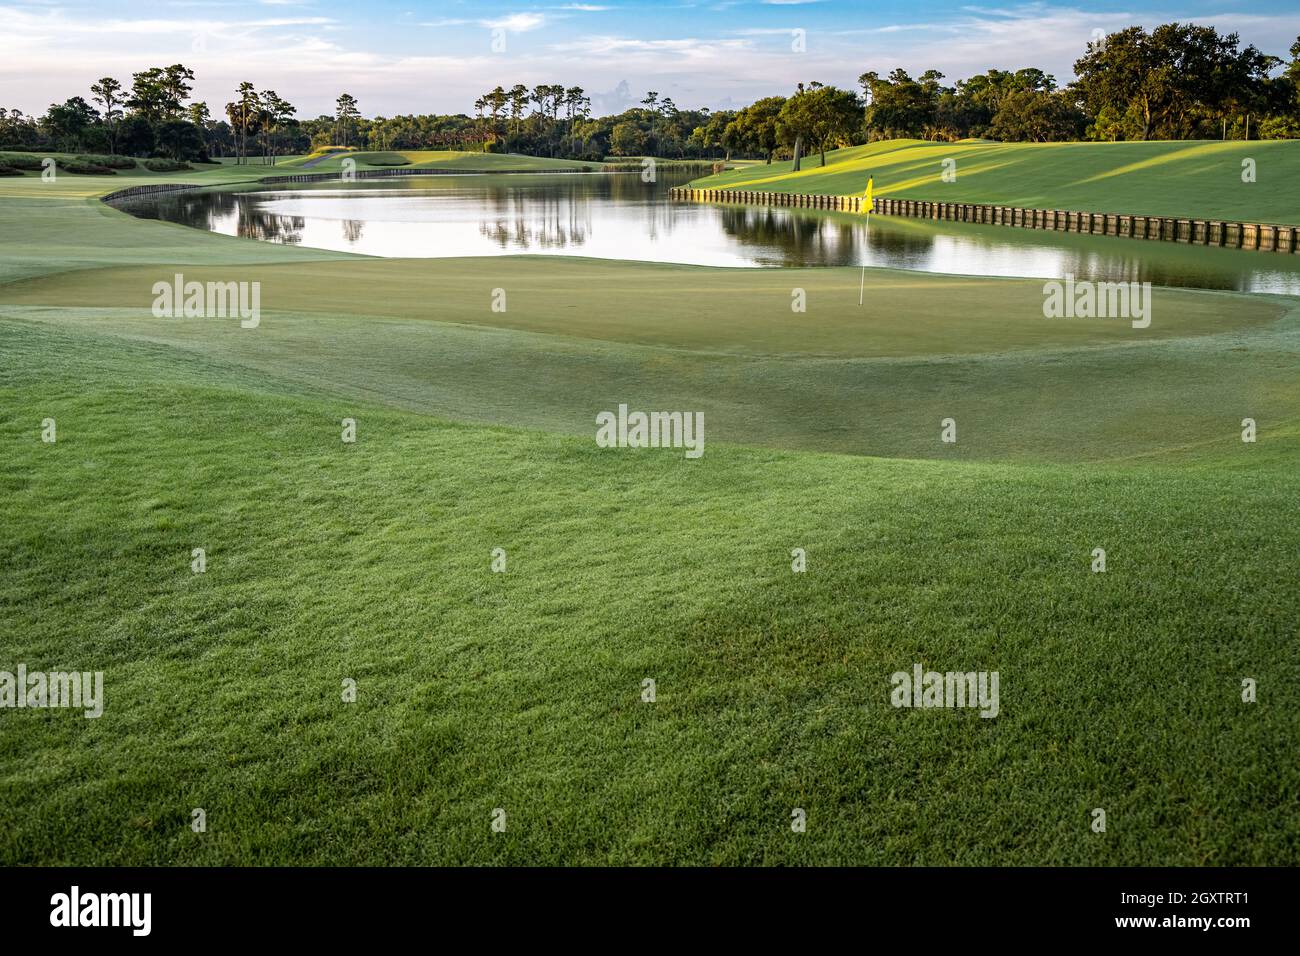 Sunrise view of the 18th green at the TPC Sawgrass Stadium Course, home of THE PLAYERS golf tournament in Ponte Vedra Beach, Florida. (USA) Stock Photo